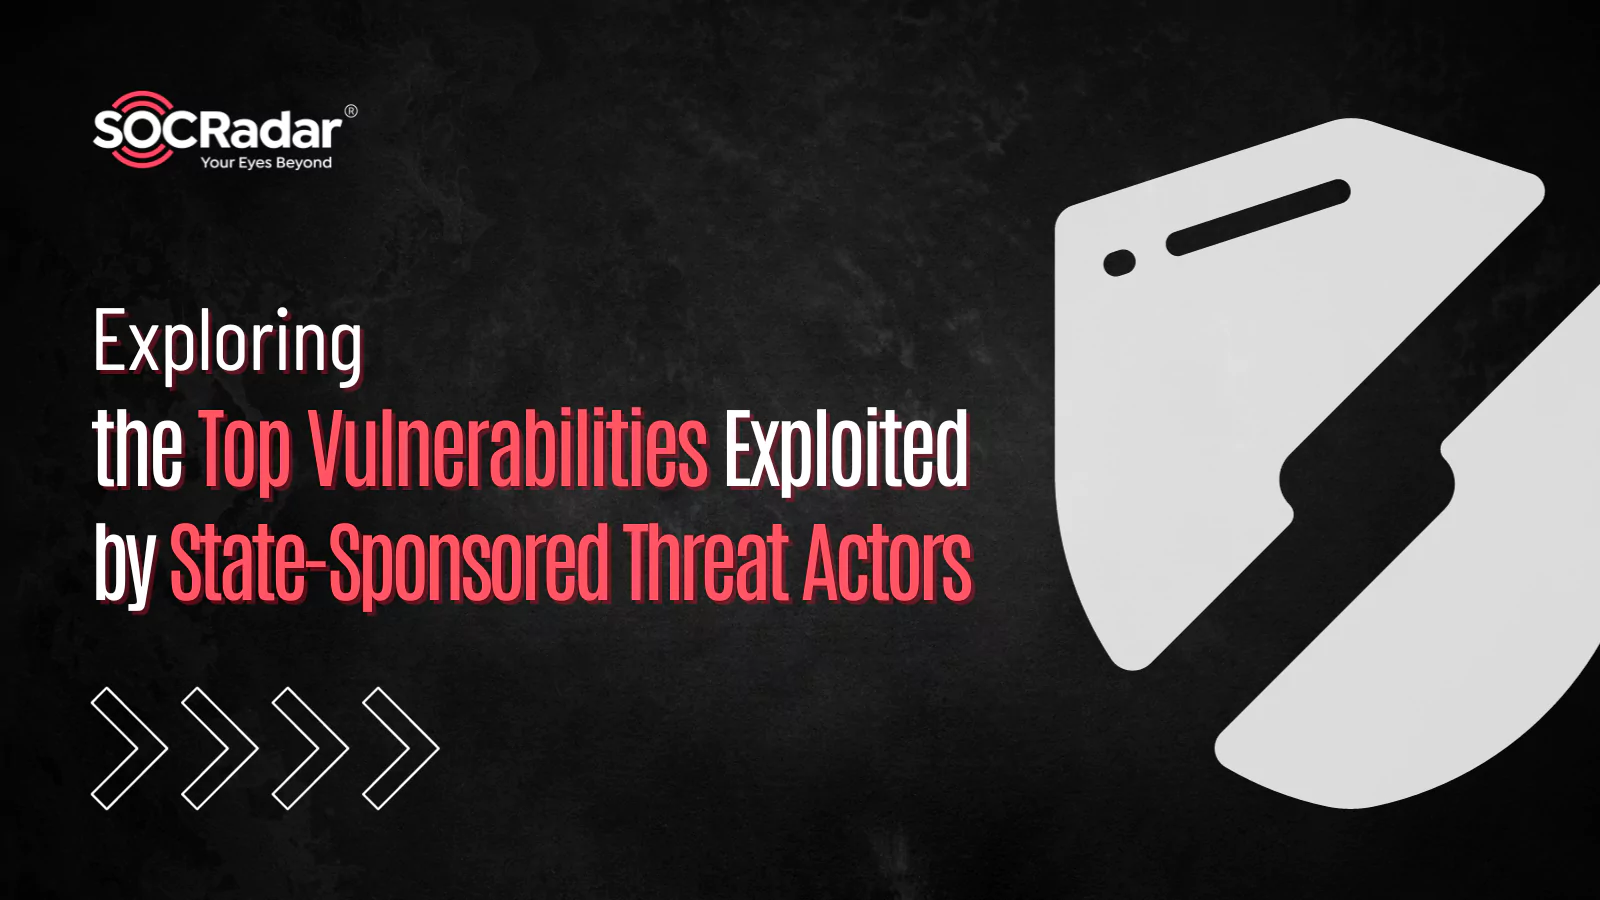 SOCRadar® Cyber Intelligence Inc. | Exploring the Top Vulnerabilities Exploited by State-Sponsored Threat Actors